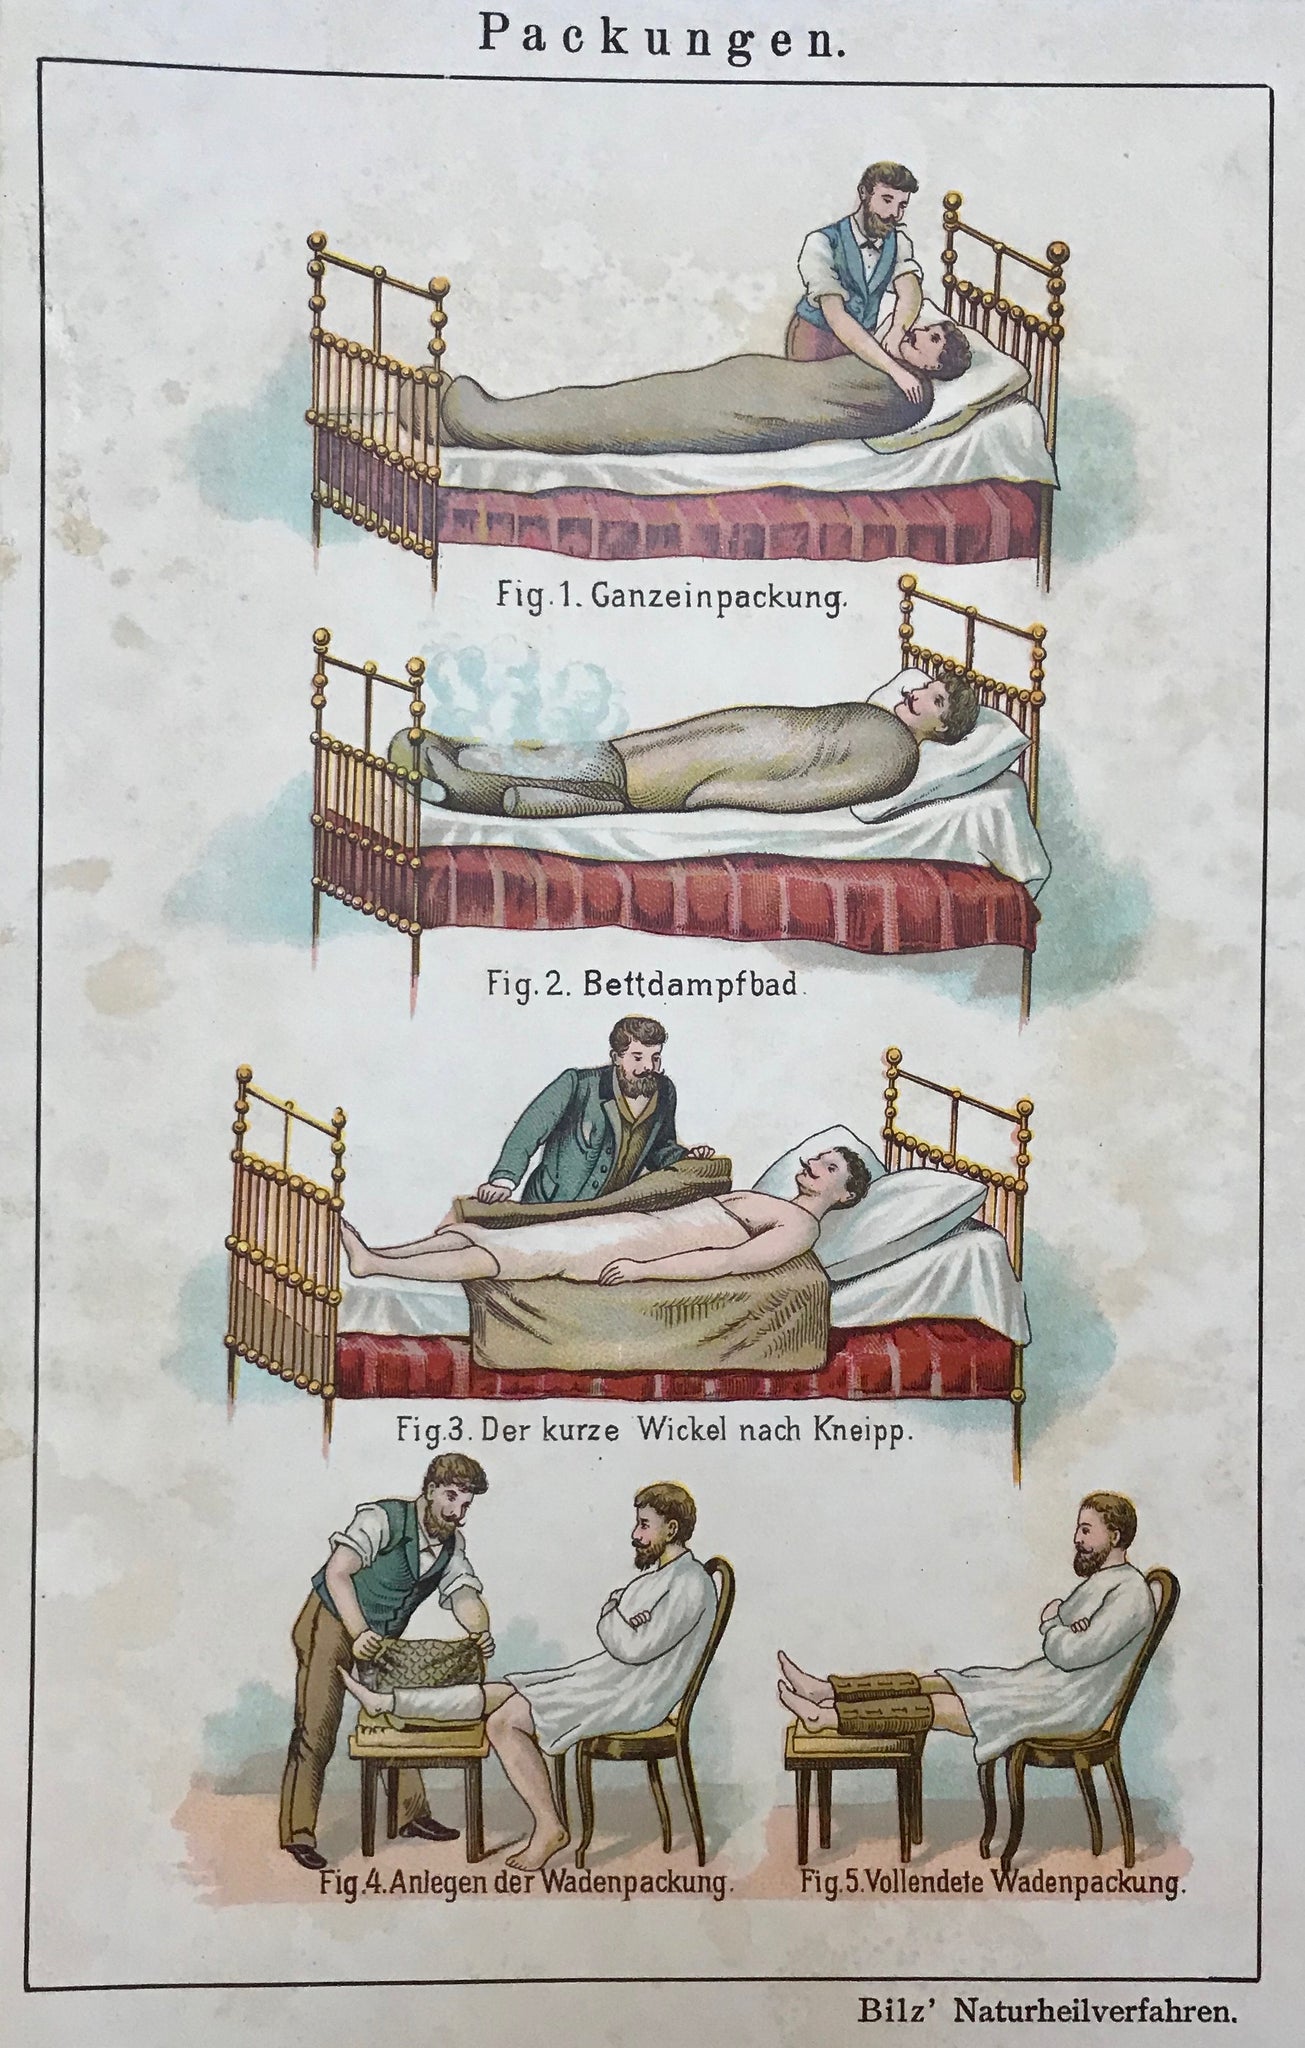 Packungen (Healing packages)  Chromolithograph ca 1875.  Page size: 22.5 x 15 cm ( 8.8 x 5.9 ")